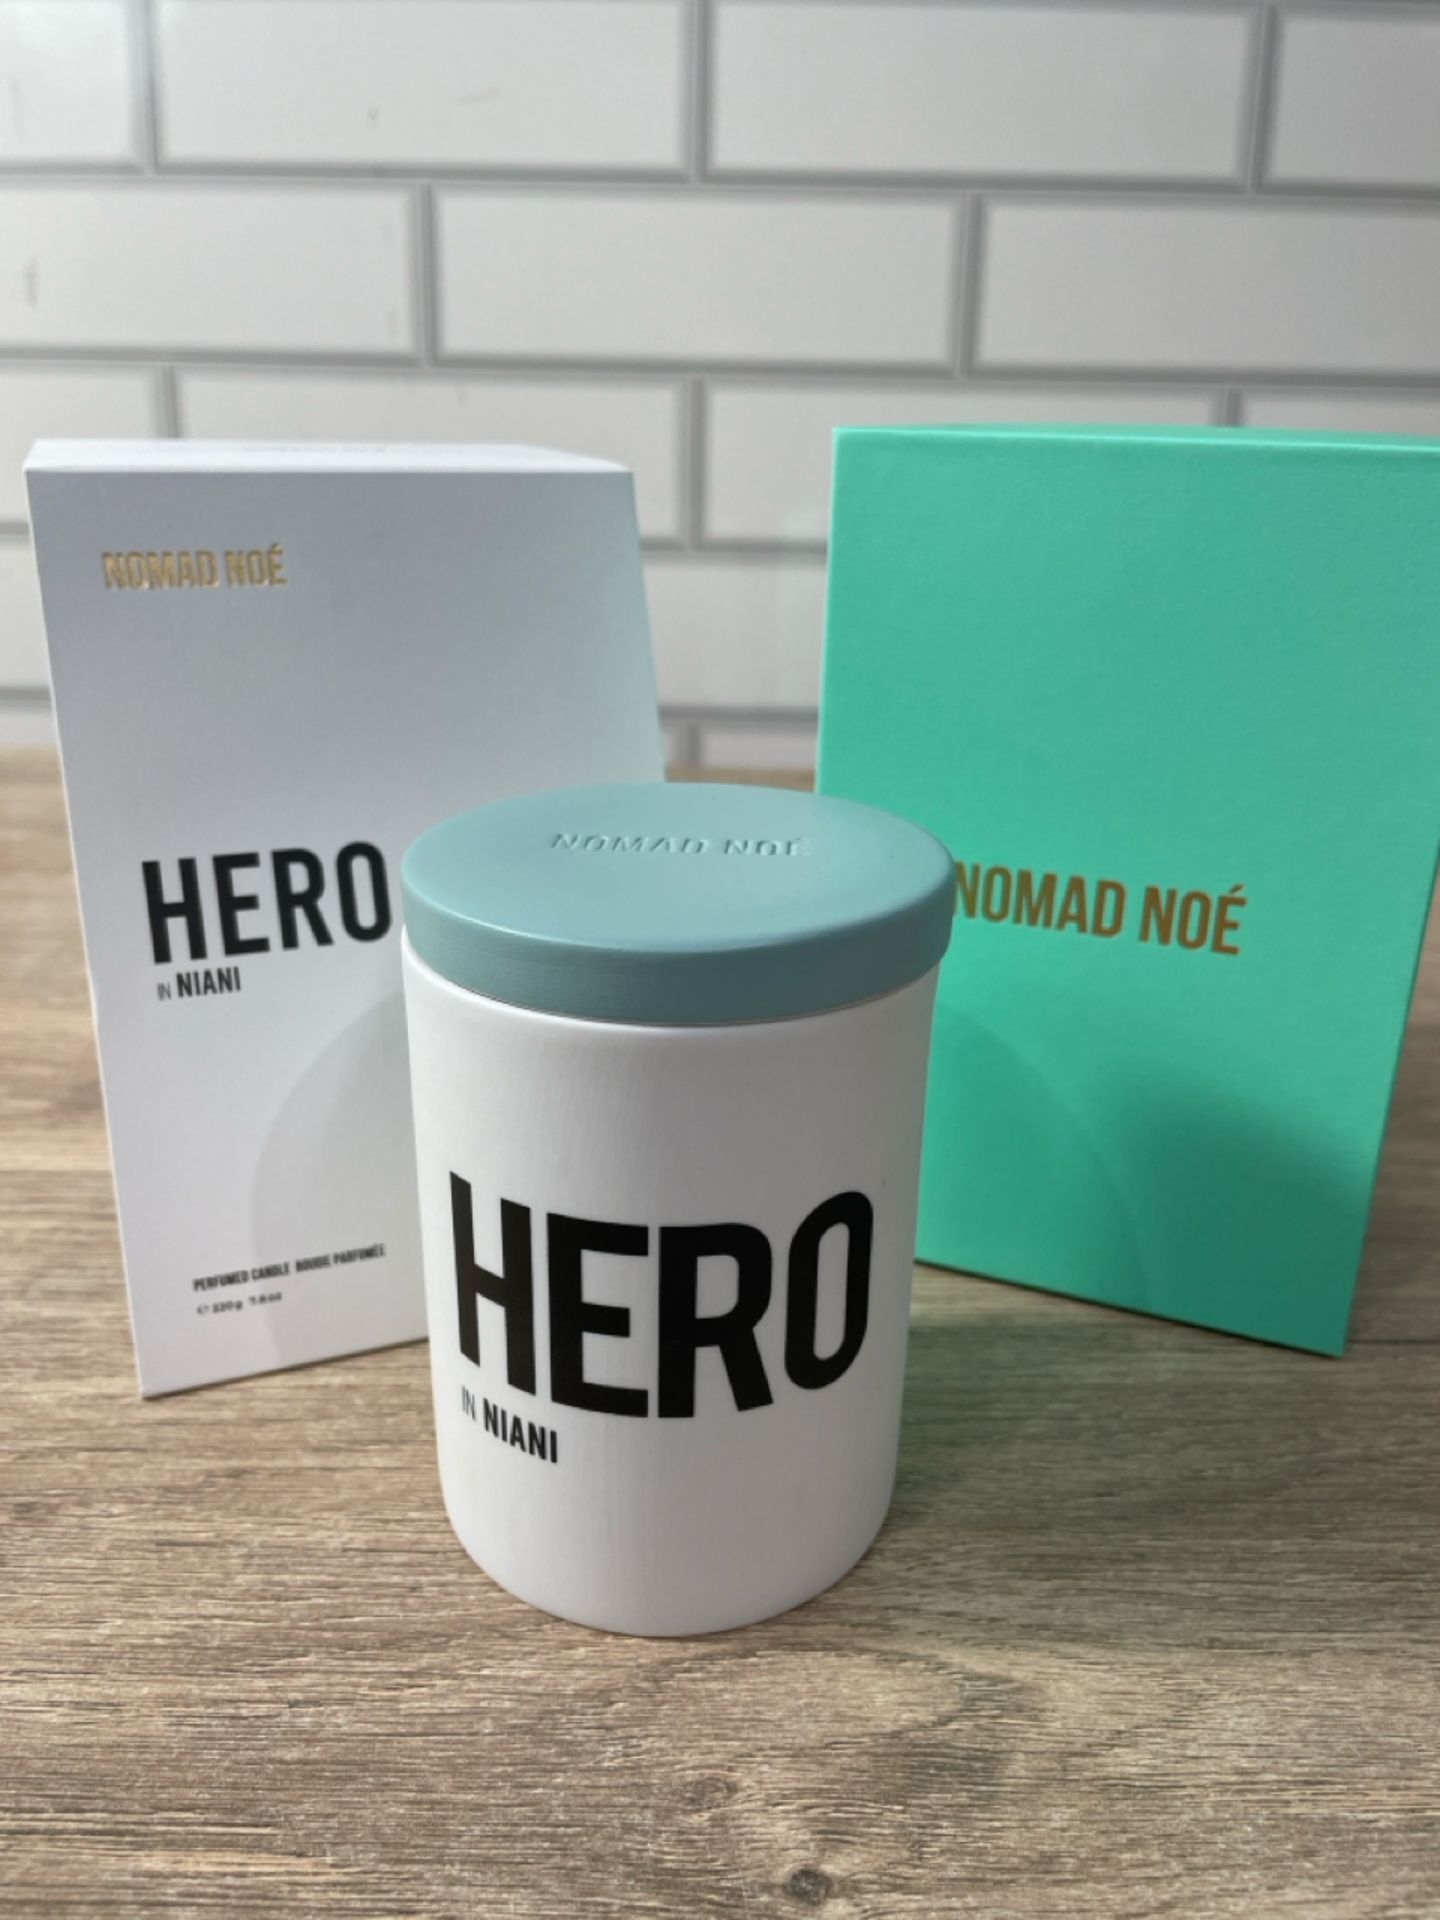 Hero Scented Candle from Nomad Noe - Image 5 of 5